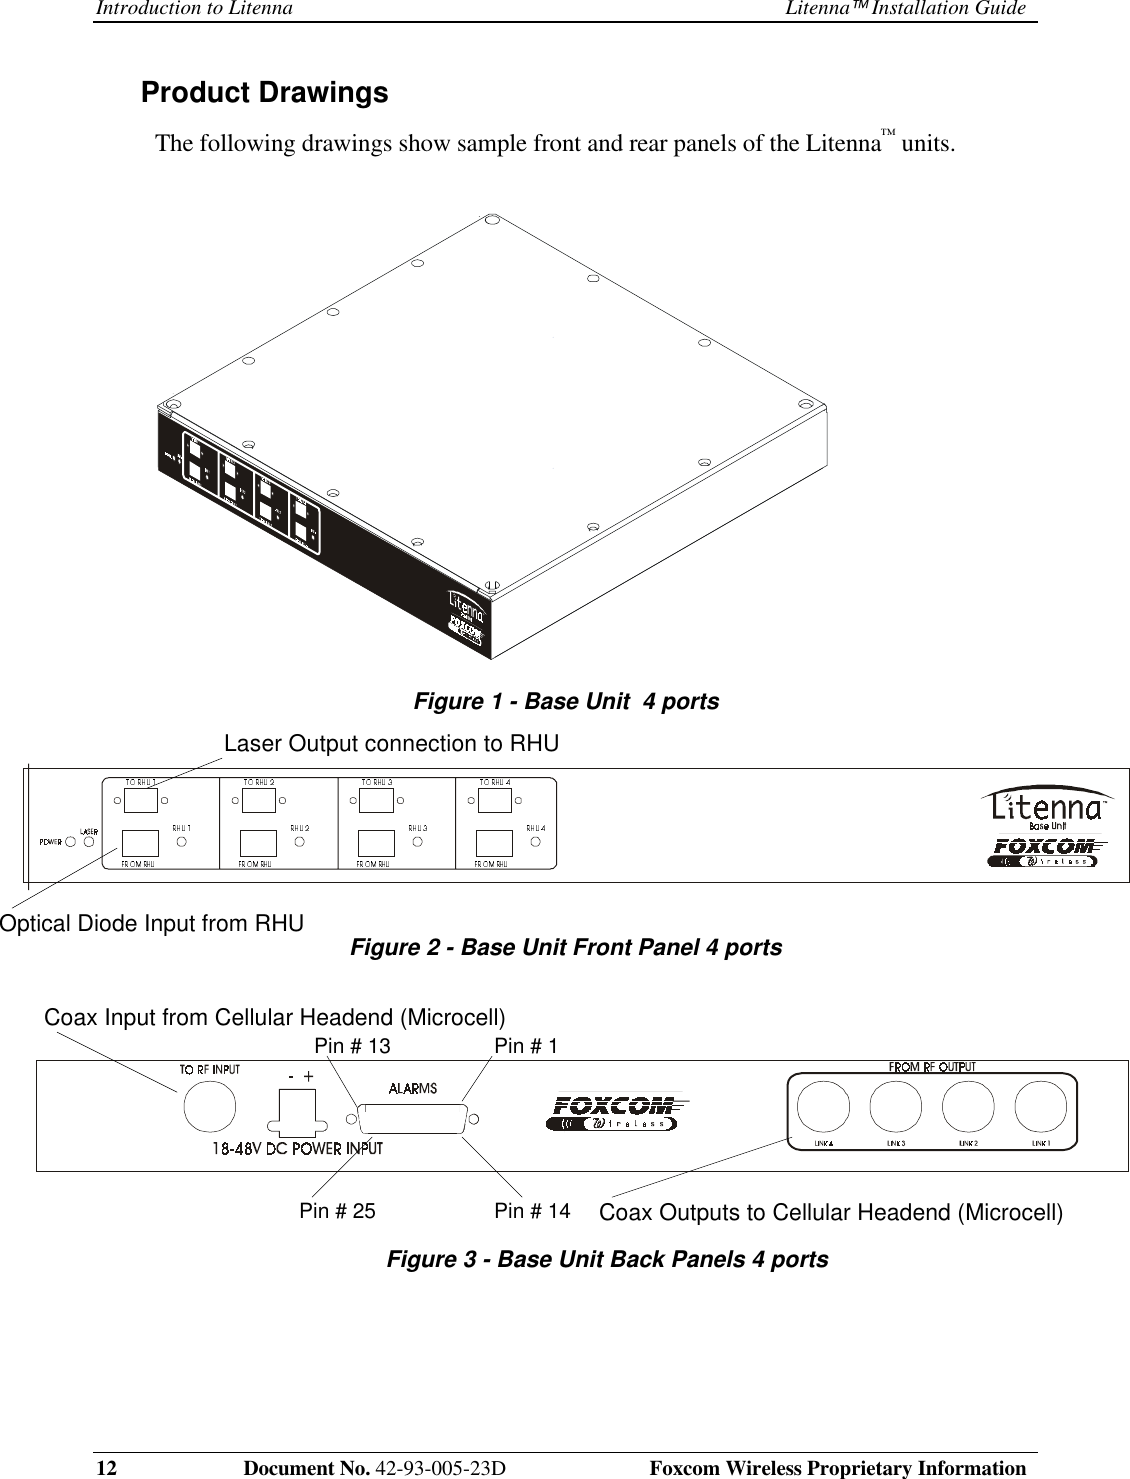 Introduction to Litenna Litenna Installation Guide12    Document No. 42-93-005-23D  Foxcom Wireless Proprietary InformationProduct DrawingsThe following drawings show sample front and rear panels of the Litenna™ units.Figure 1 - Base Unit  4 portsFigure 2 - Base Unit Front Panel 4 portsFigure 3 - Base Unit Back Panels 4 portsPin # 1Pin # 14Pin # 13Pin # 25Coax Input from Cellular Headend (Microcell)Coax Outputs to Cellular Headend (Microcell)Optical Diode Input from RHULaser Output connection to RHU